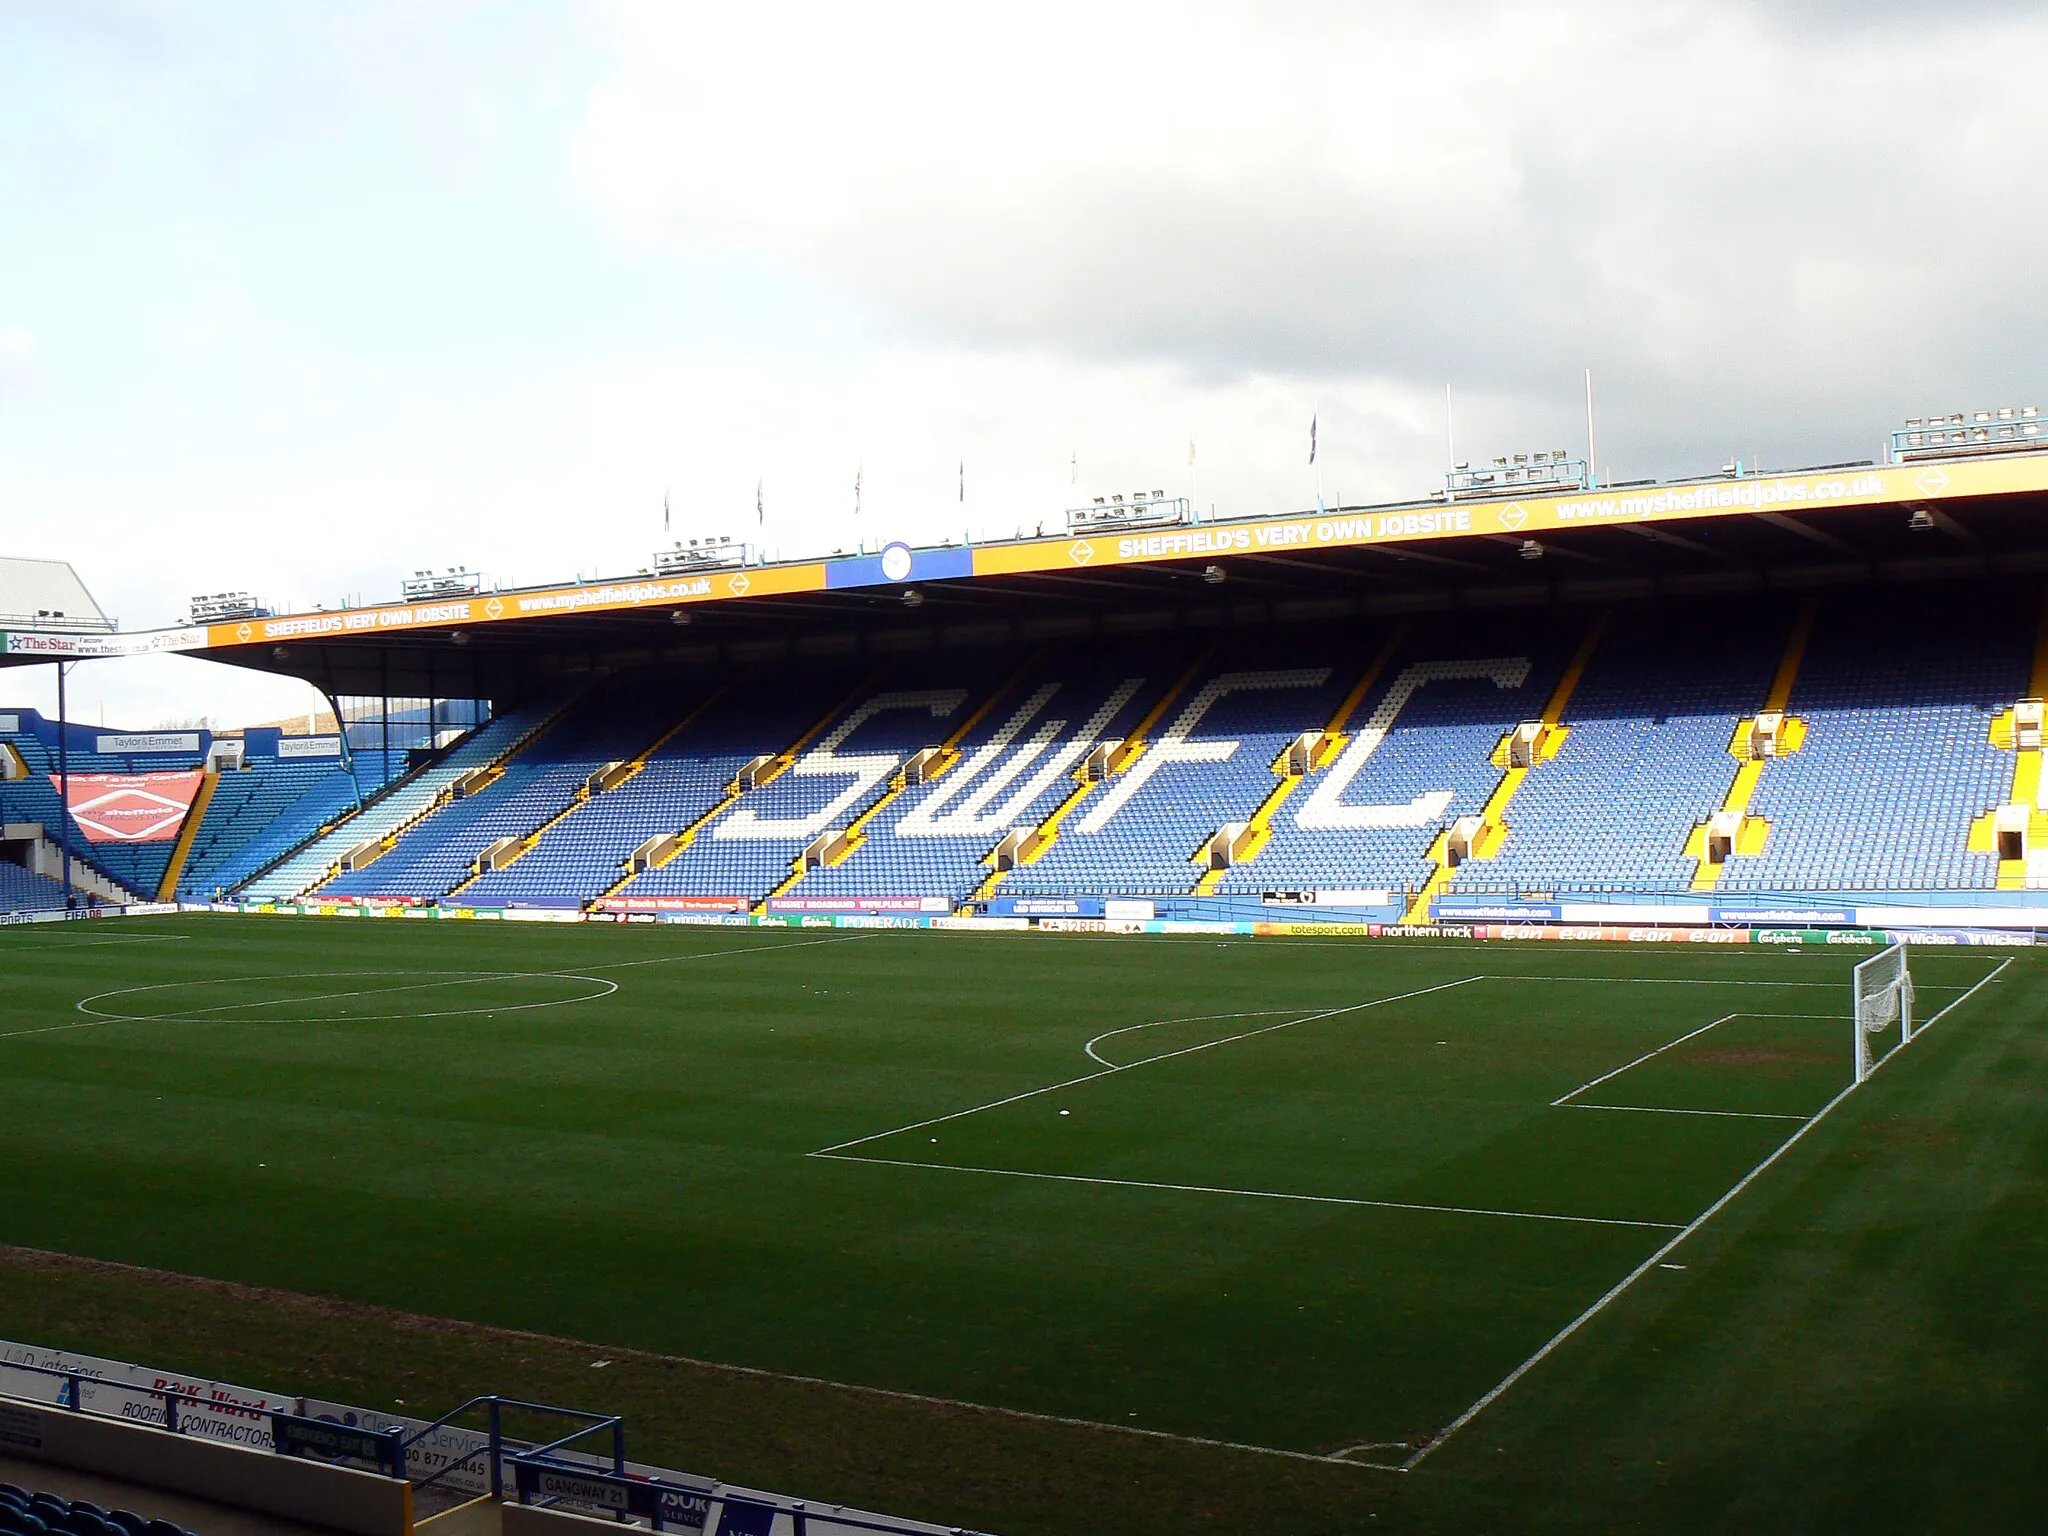 Photo showing: View of the North Stand (otherwise known as the 'Cantelever Stand') at Hillsborough Stadium, Sheffield - home to Sheffield Wednesday Football Club. Image shows the 2007-2010 sponsorship livery of 'My Sheffield Jobs', 'Sheffield's Very Own Jobsite', 'www.mysheffieldjobs.co.uk'.